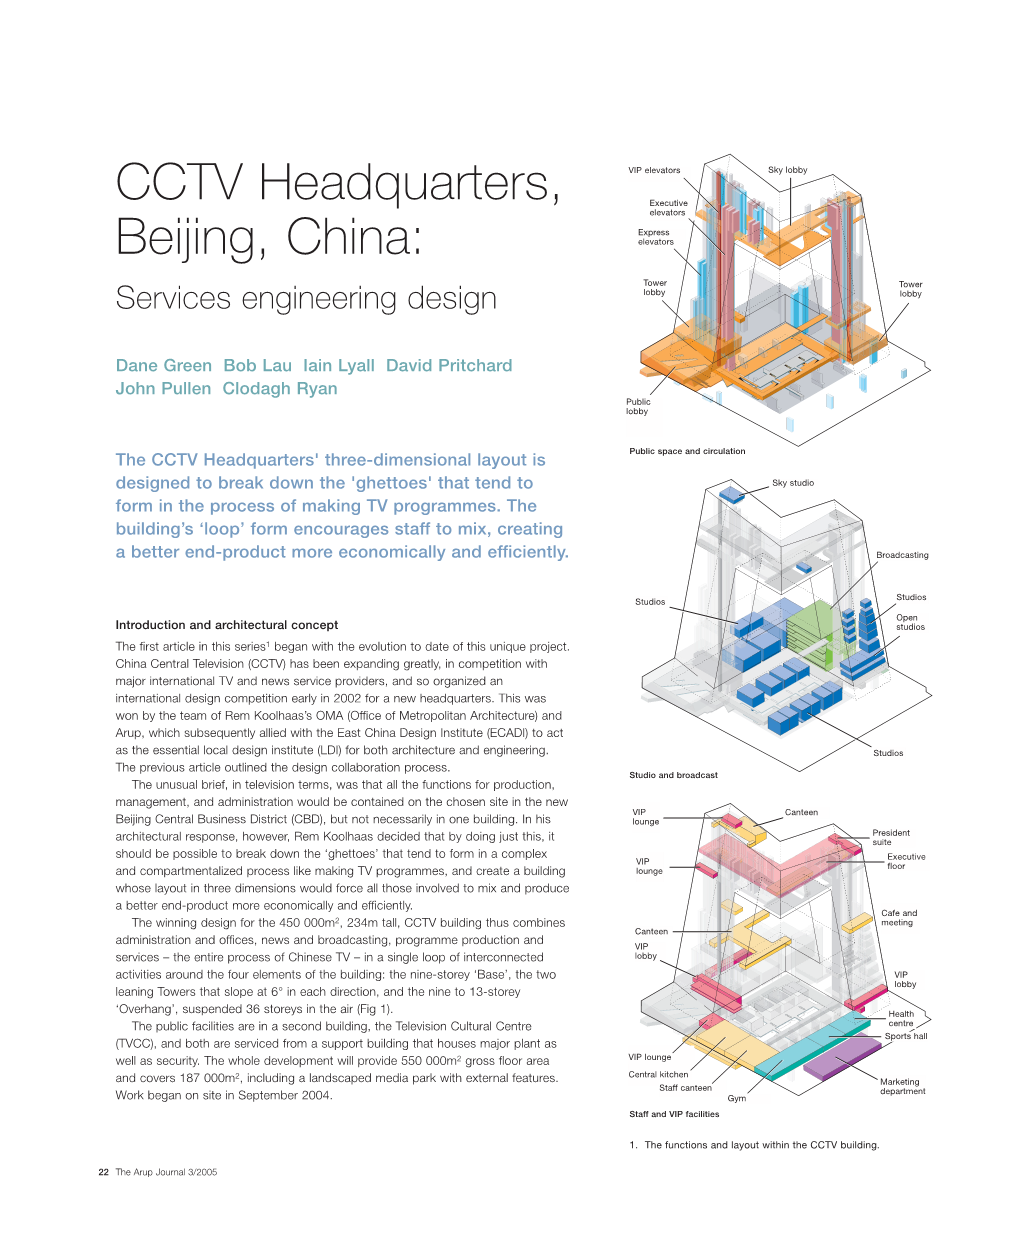 CCTV Headquarters, Beijing, China: Structural Engineering Design and Buildings to Protect External Areas and Façades Approvals